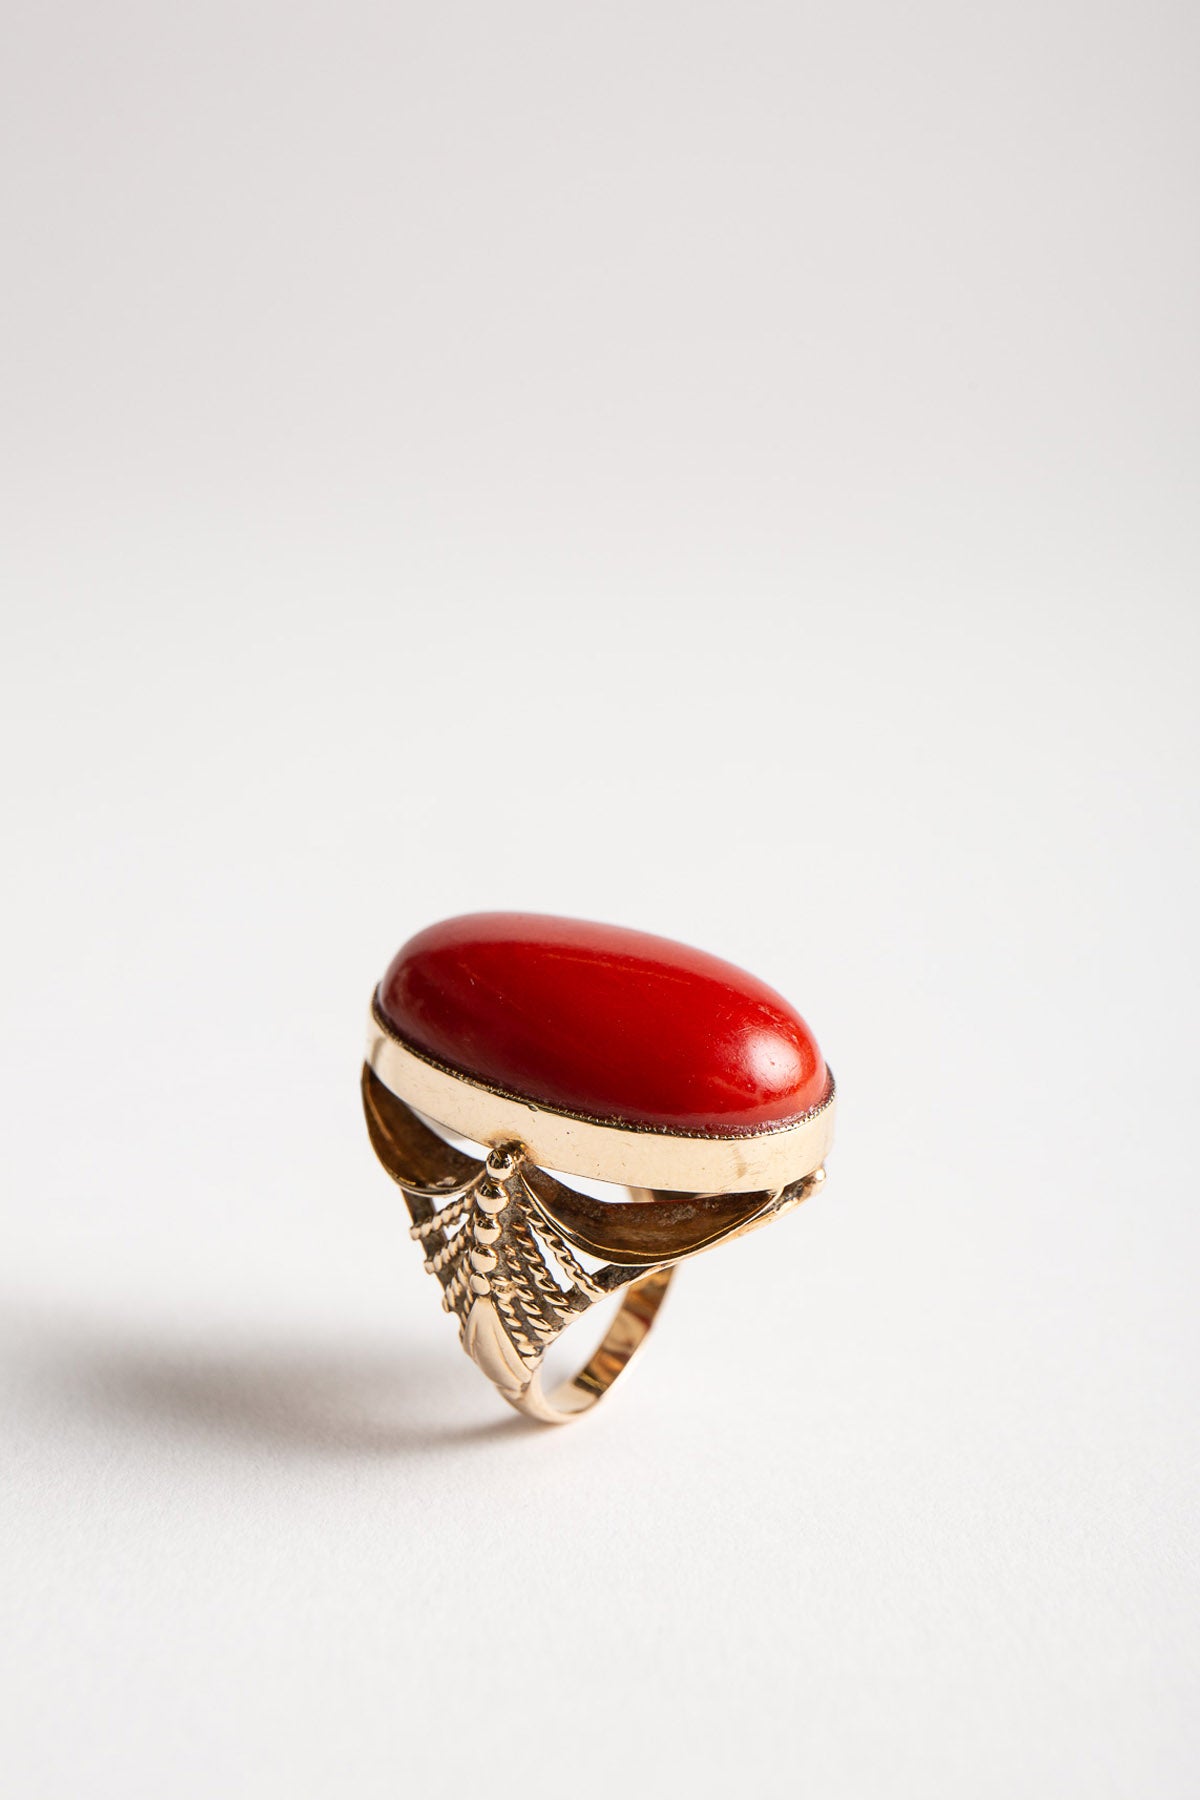 MAXFIELD PRIVATE COLLECTION | 1970'S 18K CORAL RING